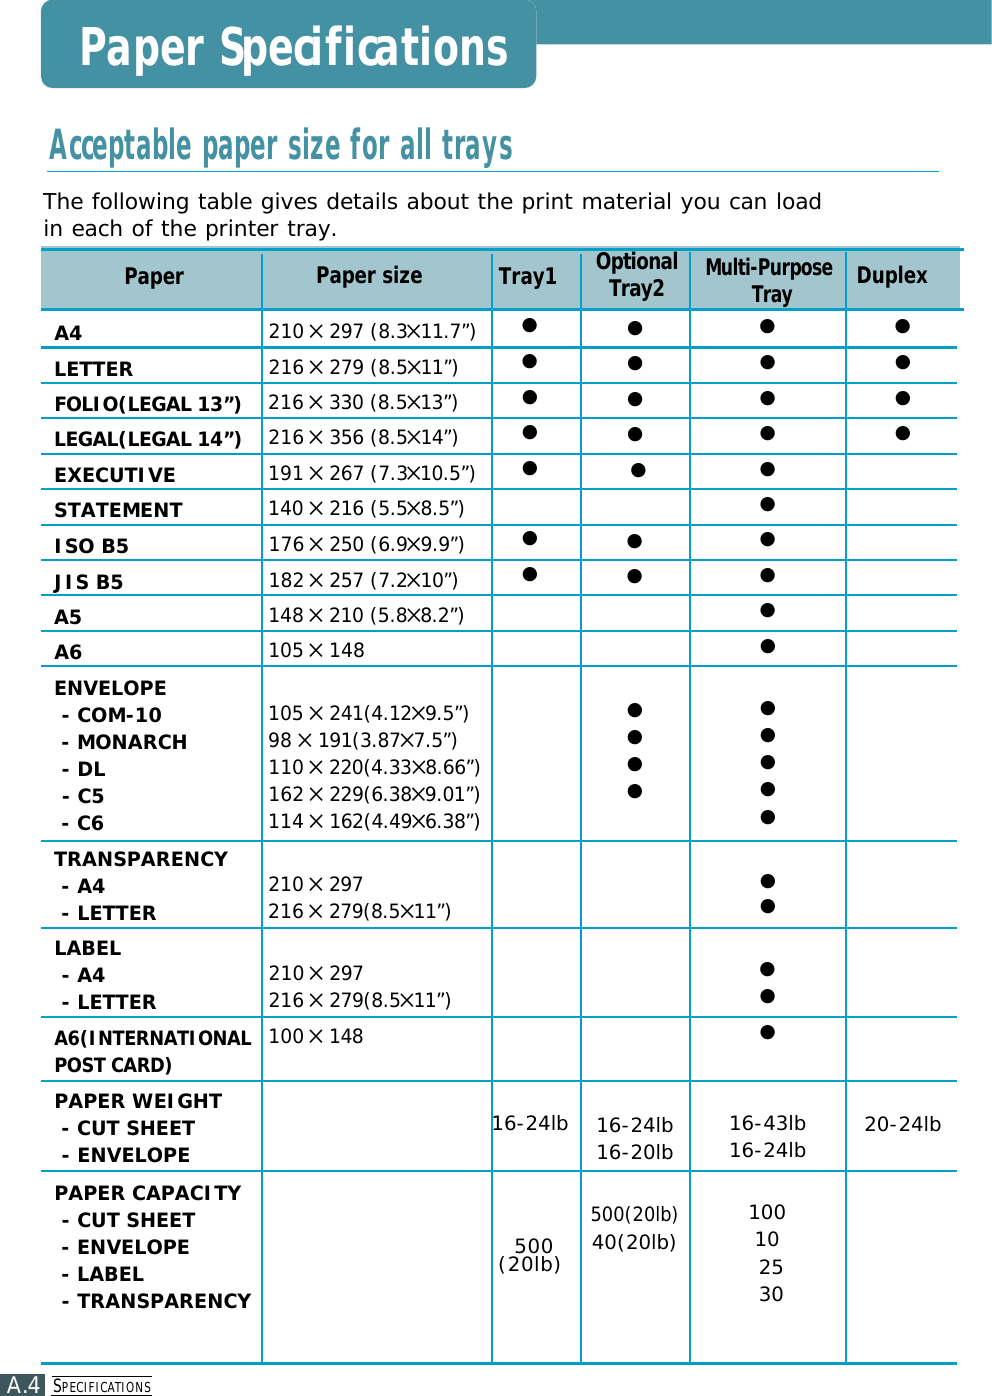 SP E C I F I C AT I O N SA.4Paper SpecificationsThe following table gives details about the print material you can load in each of the printer tray.A4LETTERFOLIO(LEGAL 13”)LEGAL(LEGAL 14”)EXECUTIVESTATEMENTISO B5JIS B5A5A6ENVELOPE- COM-10- MONARCH- DL- C5- C6TRANSPARENCY - A4- LETTERLABEL- A4- LETTERA6(INTERNATIONAL POST CARD)PAPER WEIGHT- CUT SHEET- ENVELOPEPAPER CAPACITY- CUT SHEET- ENVELOPE- LABEL- TRANSPARENCY210 ✕297 (8.3✕1 1 . 7 ” )216 ✕279 (8.5✕1 1 ” )216 ✕330 (8.5✕1 3 ” )216 ✕356 (8.5✕1 4 ” )191 ✕267 (7.3✕1 0 . 5 ” )140 ✕216 (5.5✕8 . 5 ” )176 ✕250 (6.9✕9 . 9 ” )182 ✕257 (7.2✕1 0 ” )148 ✕210 (5.8✕8 . 2 ” )105 ✕148 105 ✕2 4 1 ( 4 . 1 2 ✕9 . 5 ” )98 ✕1 9 1 ( 3 . 8 7✕7 . 5 ” )110 ✕2 2 0 ( 4 . 3 3✕8 . 6 6 ” )162 ✕2 2 9 ( 6 . 3 8 ✕9 . 0 1 ” )114 ✕1 6 2 ( 4 . 4 9 ✕6 . 3 8 ” )210 ✕2 9 7216 ✕2 7 9 ( 8 . 5✕1 1 ” )210 ✕2 9 7216 ✕2 7 9 ( 8 . 5 ✕1 1 ” )100 ✕1 4 8●●●●●●●16-24lb5 0 0( 2 0 l b )●●●●●●●●●●●16-24lb16-20lb500(20lb)40(20lb)●●●●●●●●●●●●●●●●●●●●16-43lb16-24lb100  1025 30●●●●20-24lbPaper Paper size Tray1 O p t i o n a lT r a y 2M u l t i - P u r p o s eT r a yDuplexAcceptable paper size for all trays